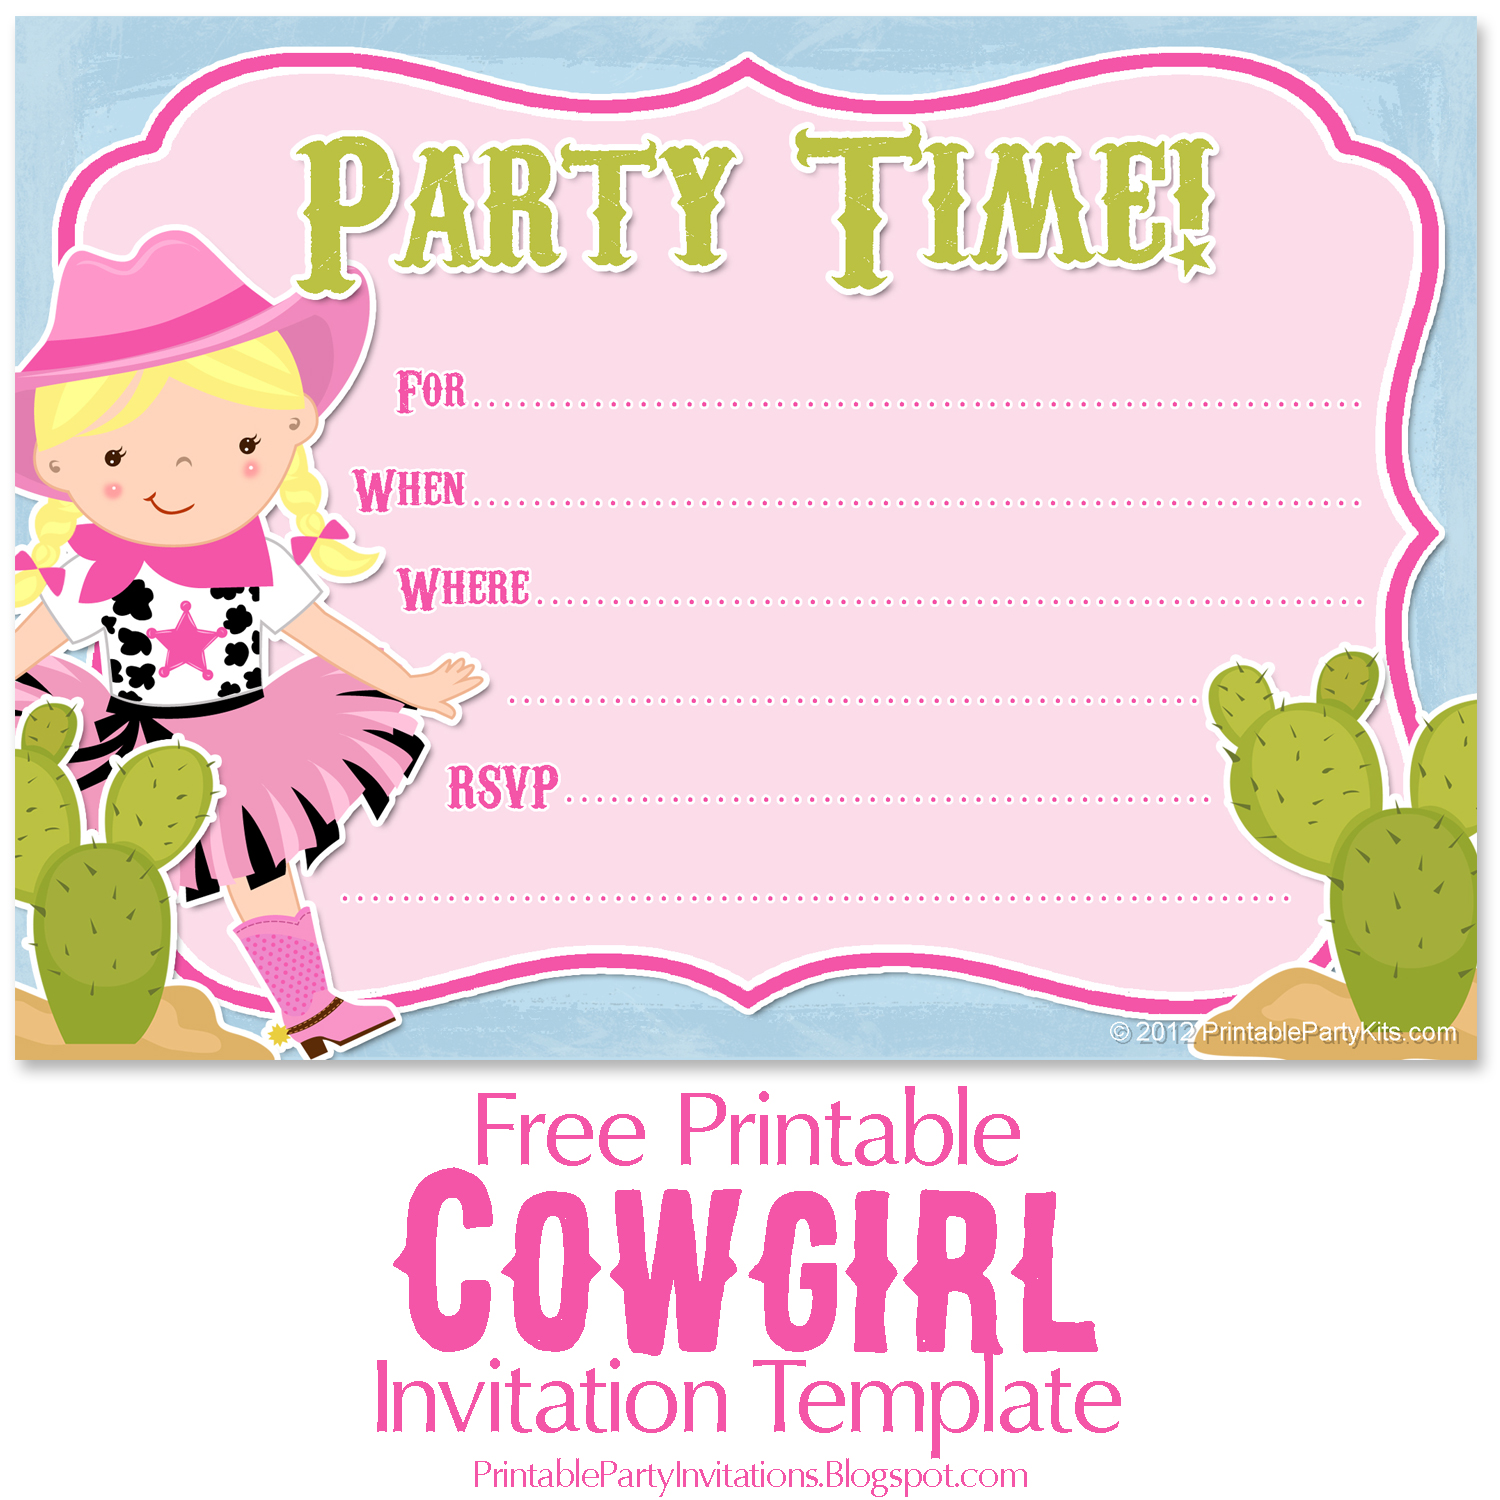 free-cowgirl-invitations-free-printable-party-invitations